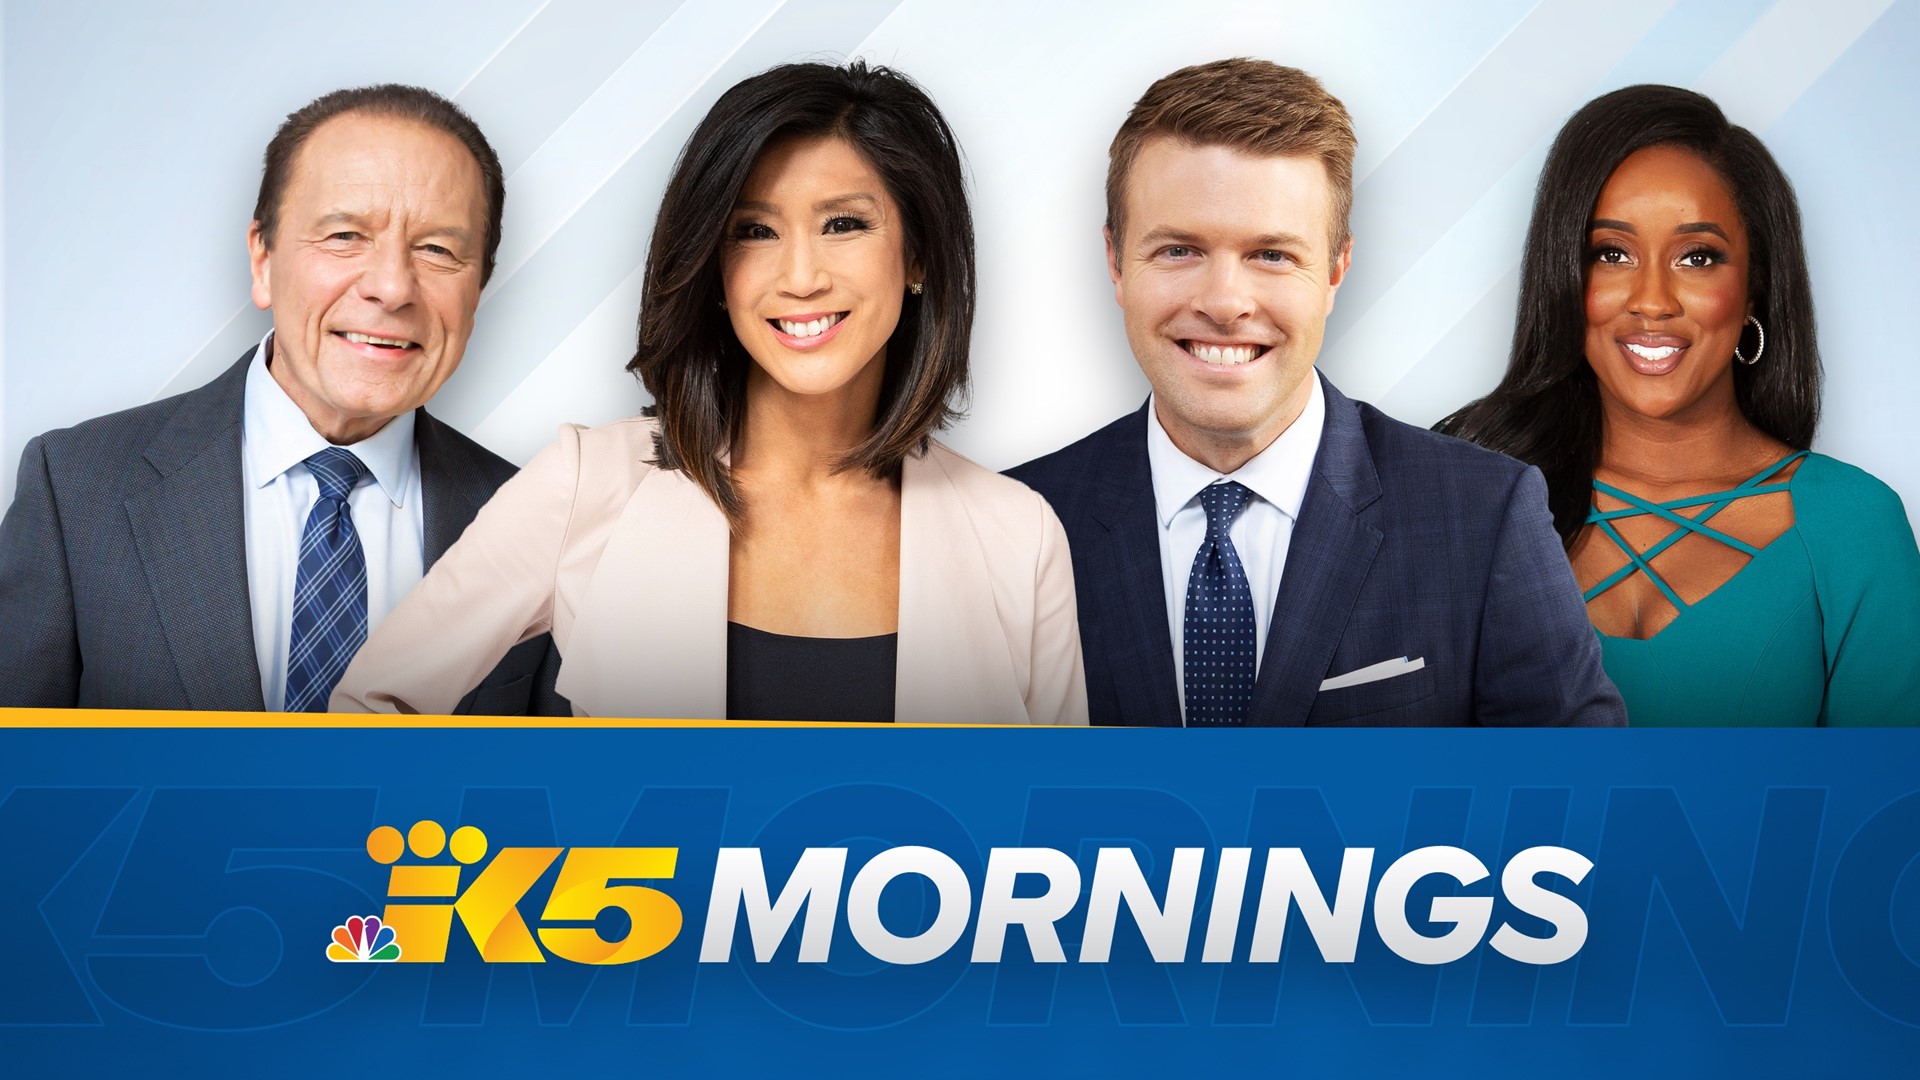 The KING 5 Mornings Team presents a first look at the biggest news stories in western Washington and beyond, along with an up-to-the minute weather and traffic.